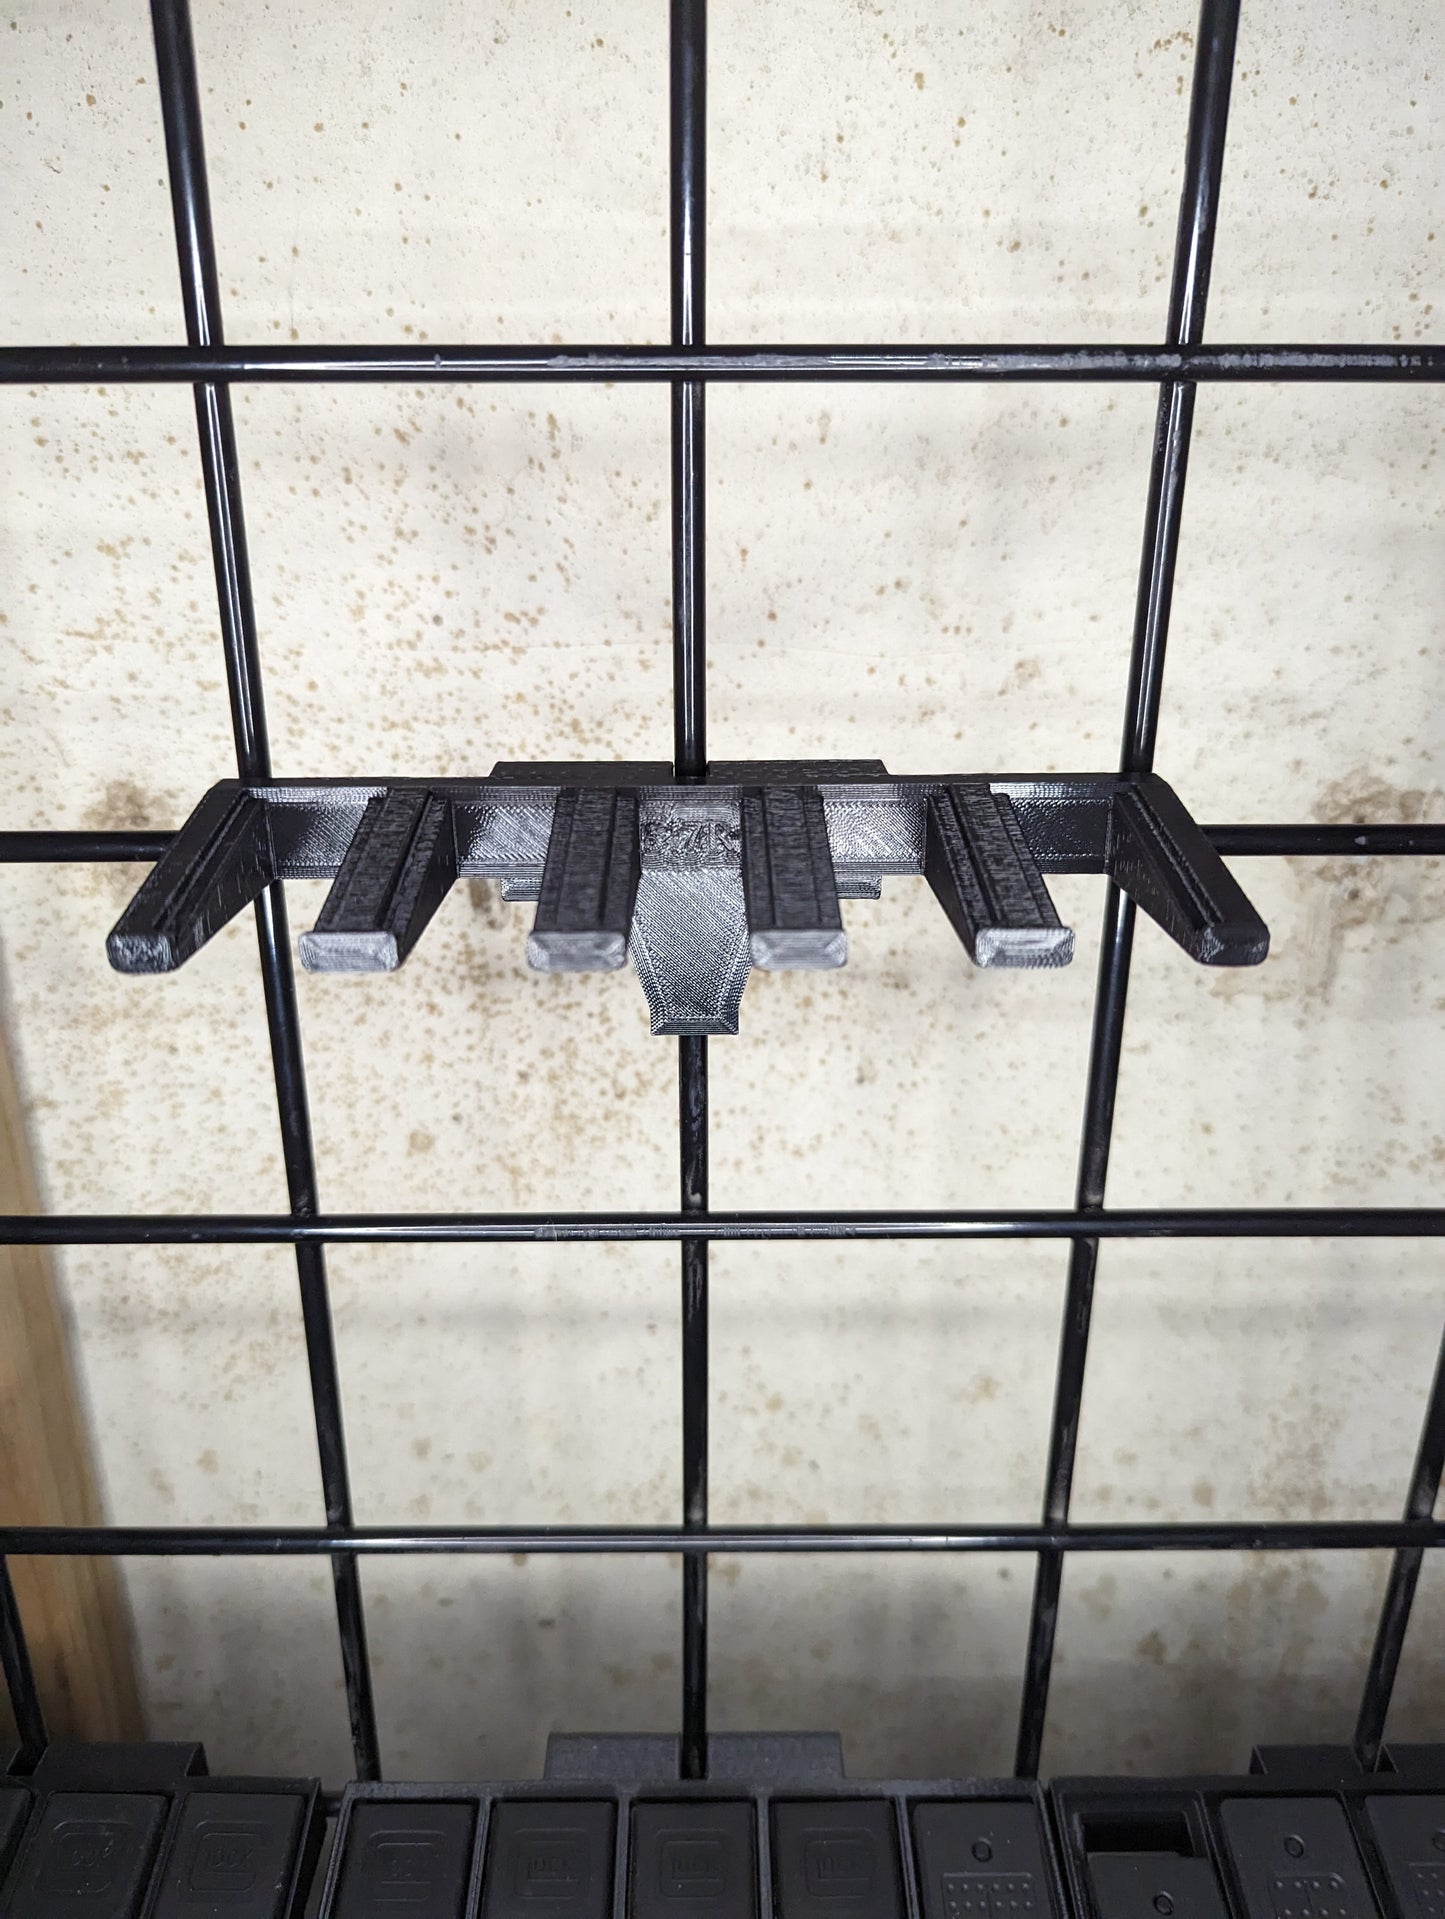 Mount for Ruger 5.7 Mags - Gridwall | Magazine Holder Storage Rack